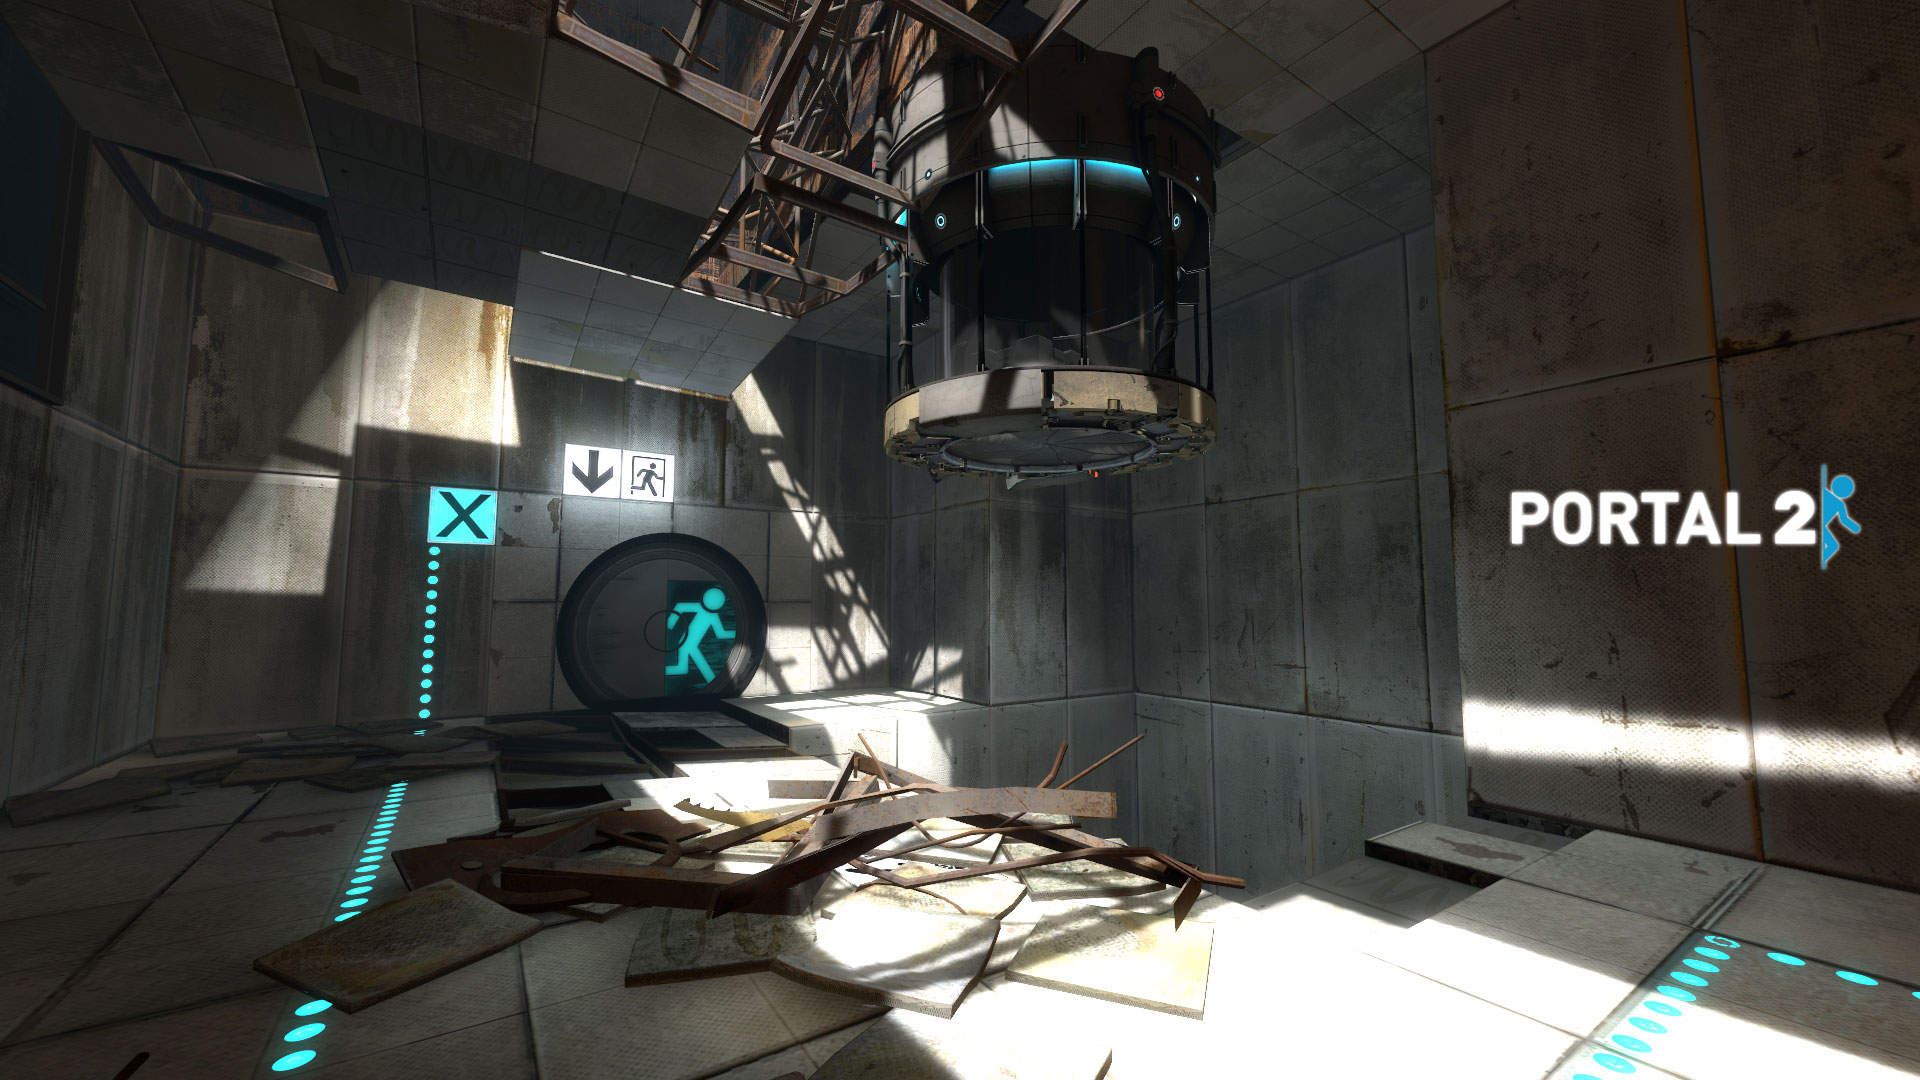 Portal 2 Wallpapers in HD High Resolution Page 5